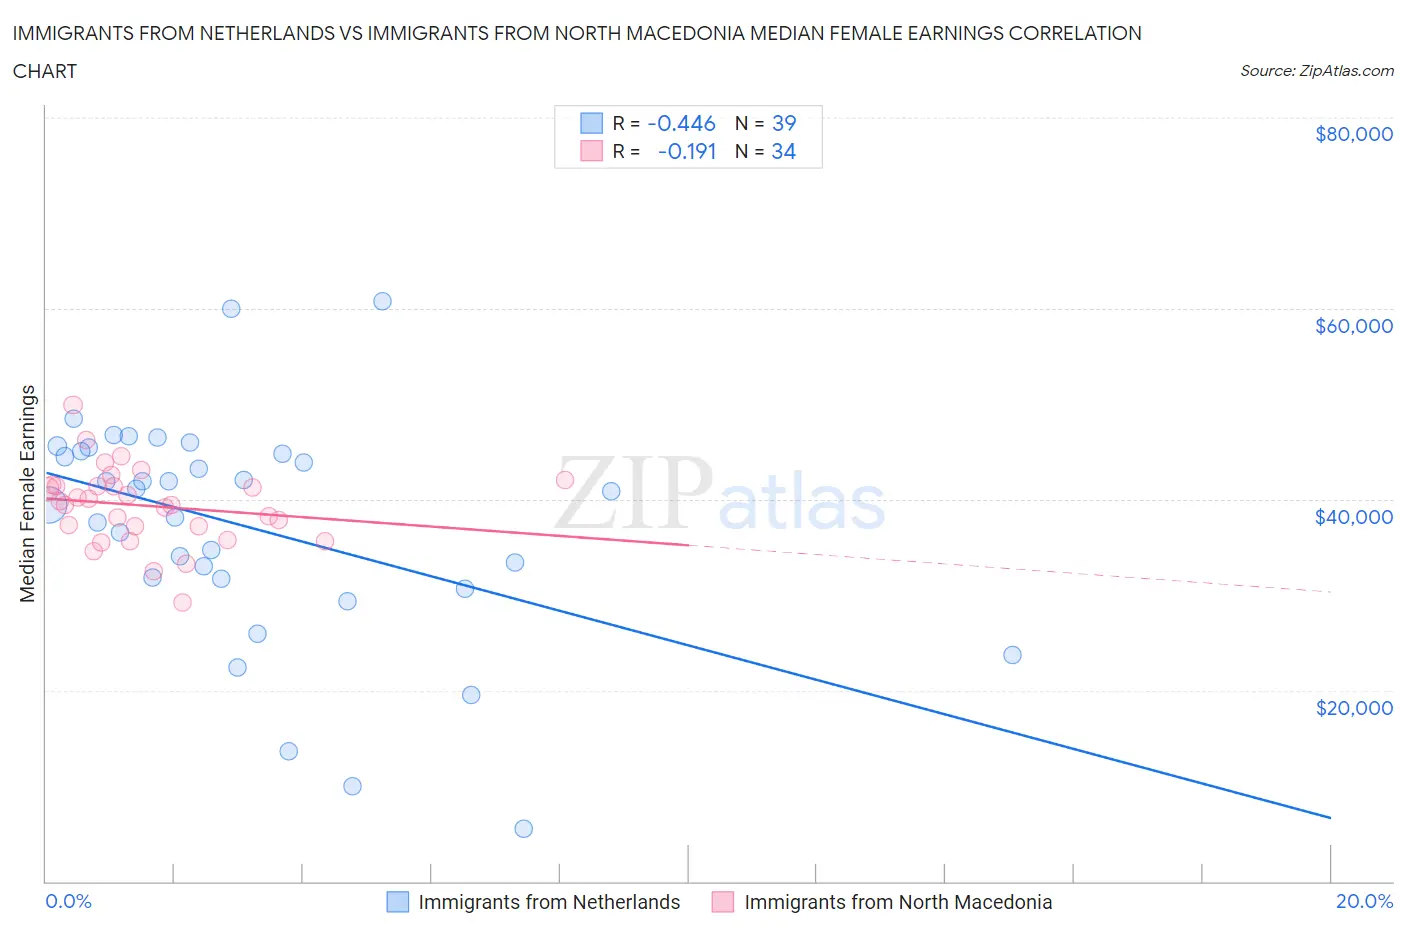 Immigrants from Netherlands vs Immigrants from North Macedonia Median Female Earnings